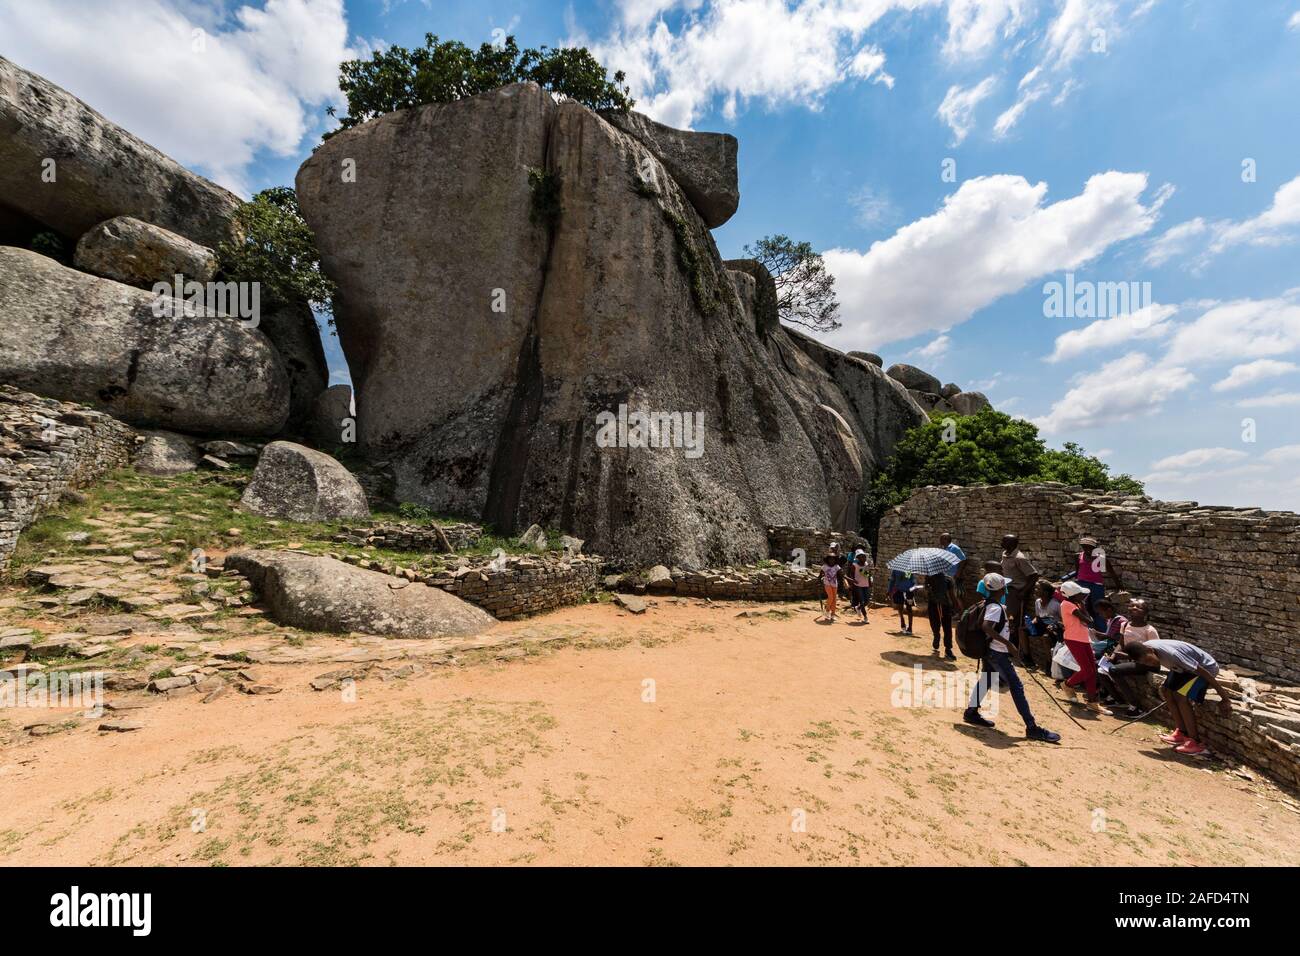 The Hill Fort, Great Zimbabwe Ruins, Masvingo, Zimbabwe. A group of school children on a trip to the ruins, a UNESCO world heritage site. The ruins are the remains of the biggest fortified city in southern Africa Stock Photo